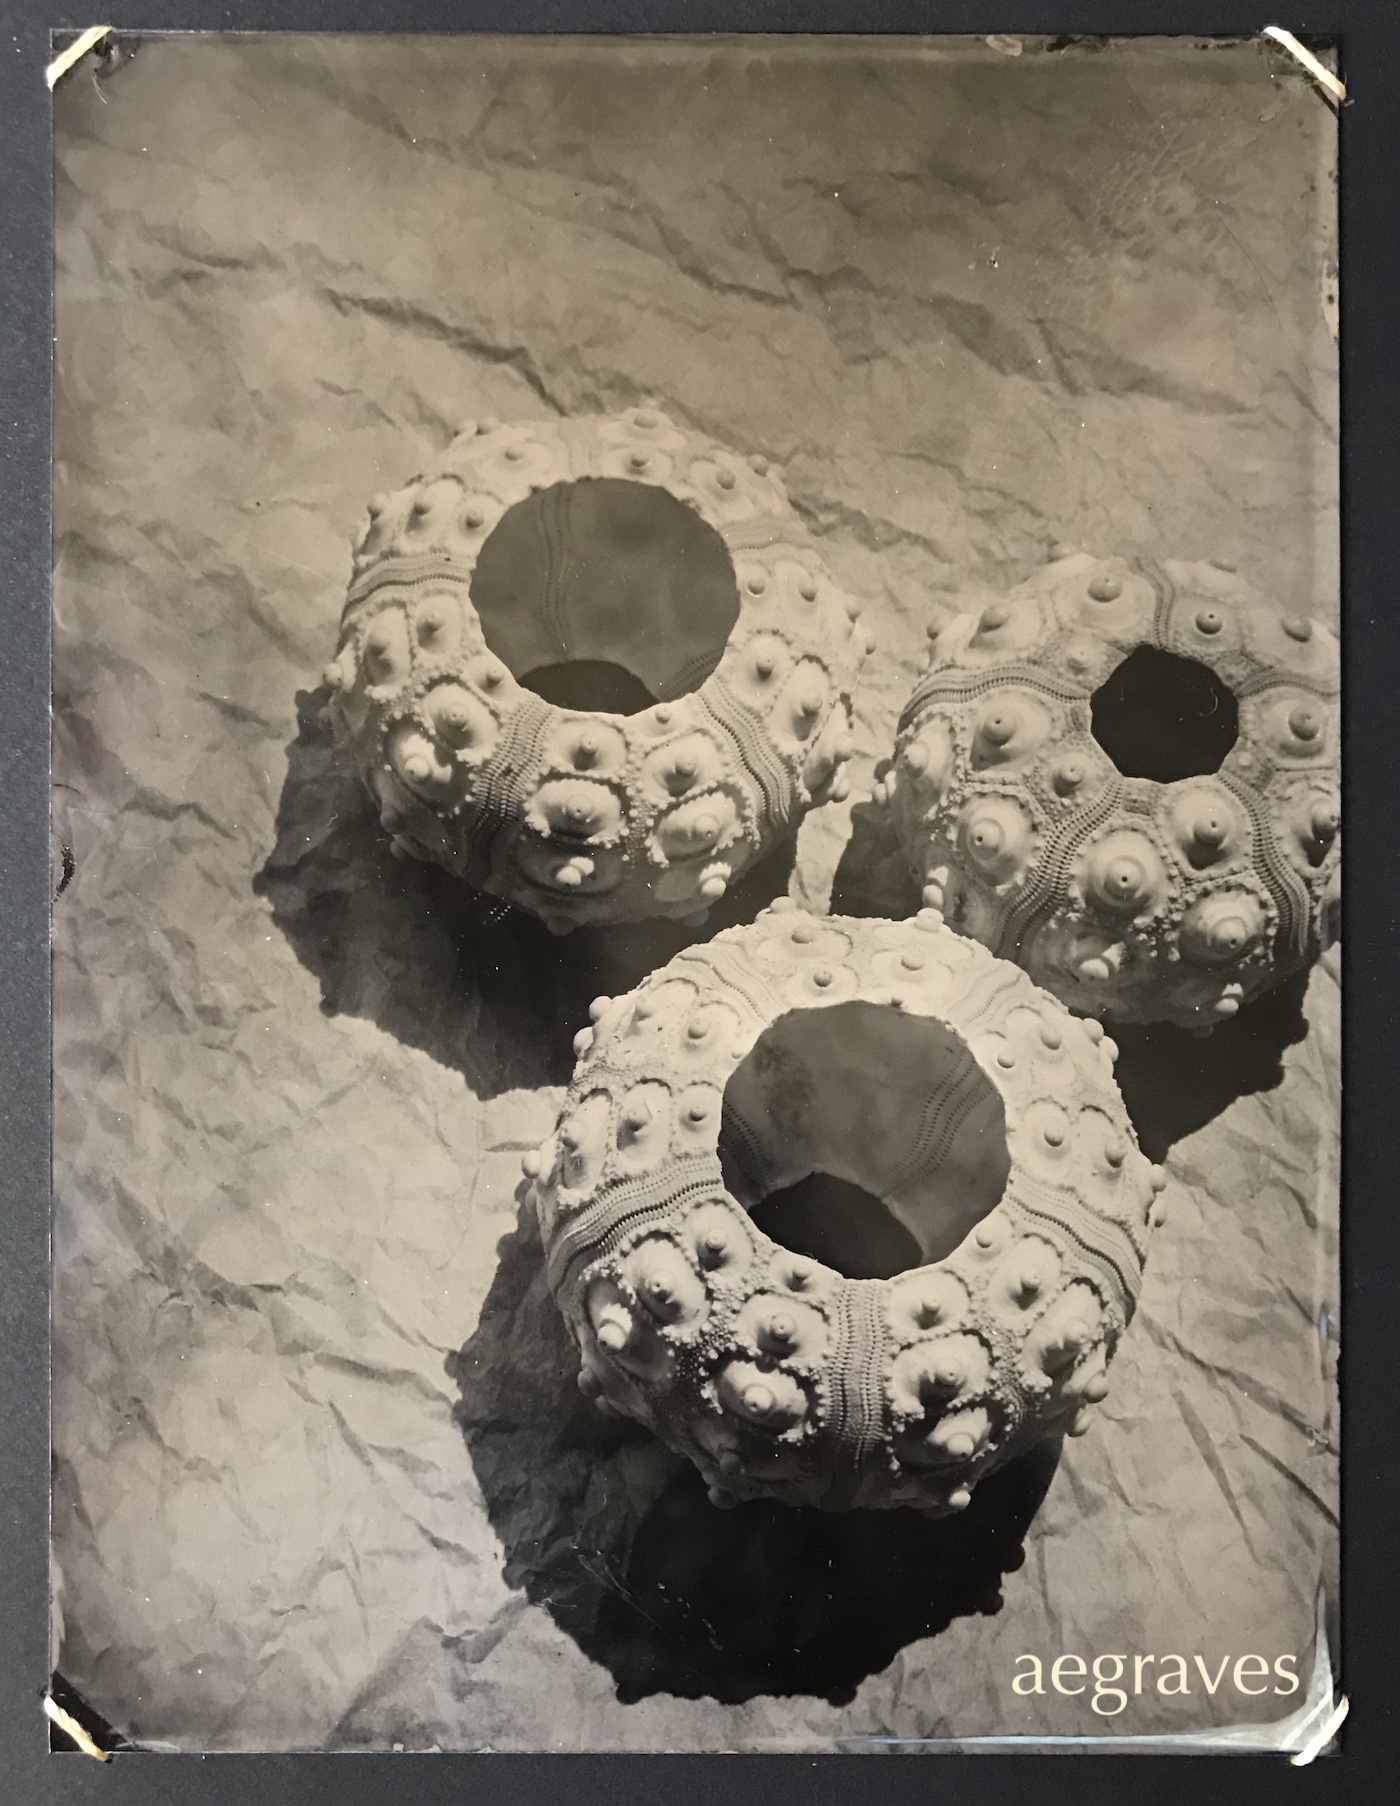 Wet Collodion image of three urchin skeletons on trophy aluminum (ferrotype) by A.E. Graves